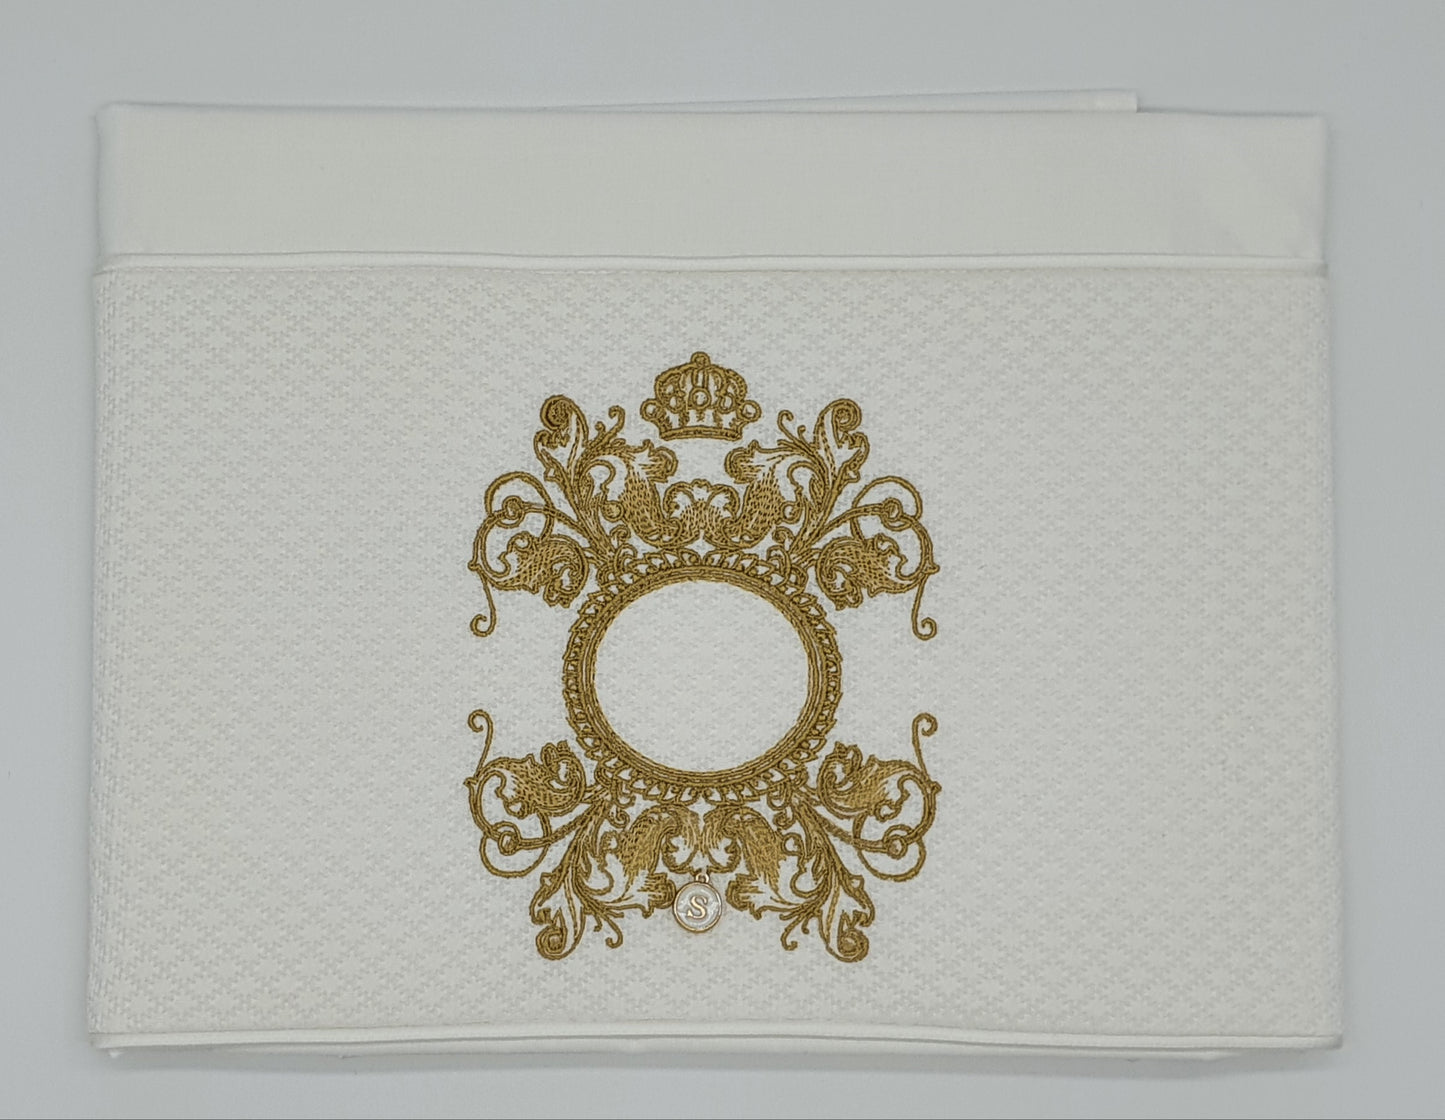 'The Crown is Hers' 2pc Bassinet Sheet Set,  Gold Embroidery on White Jacquard